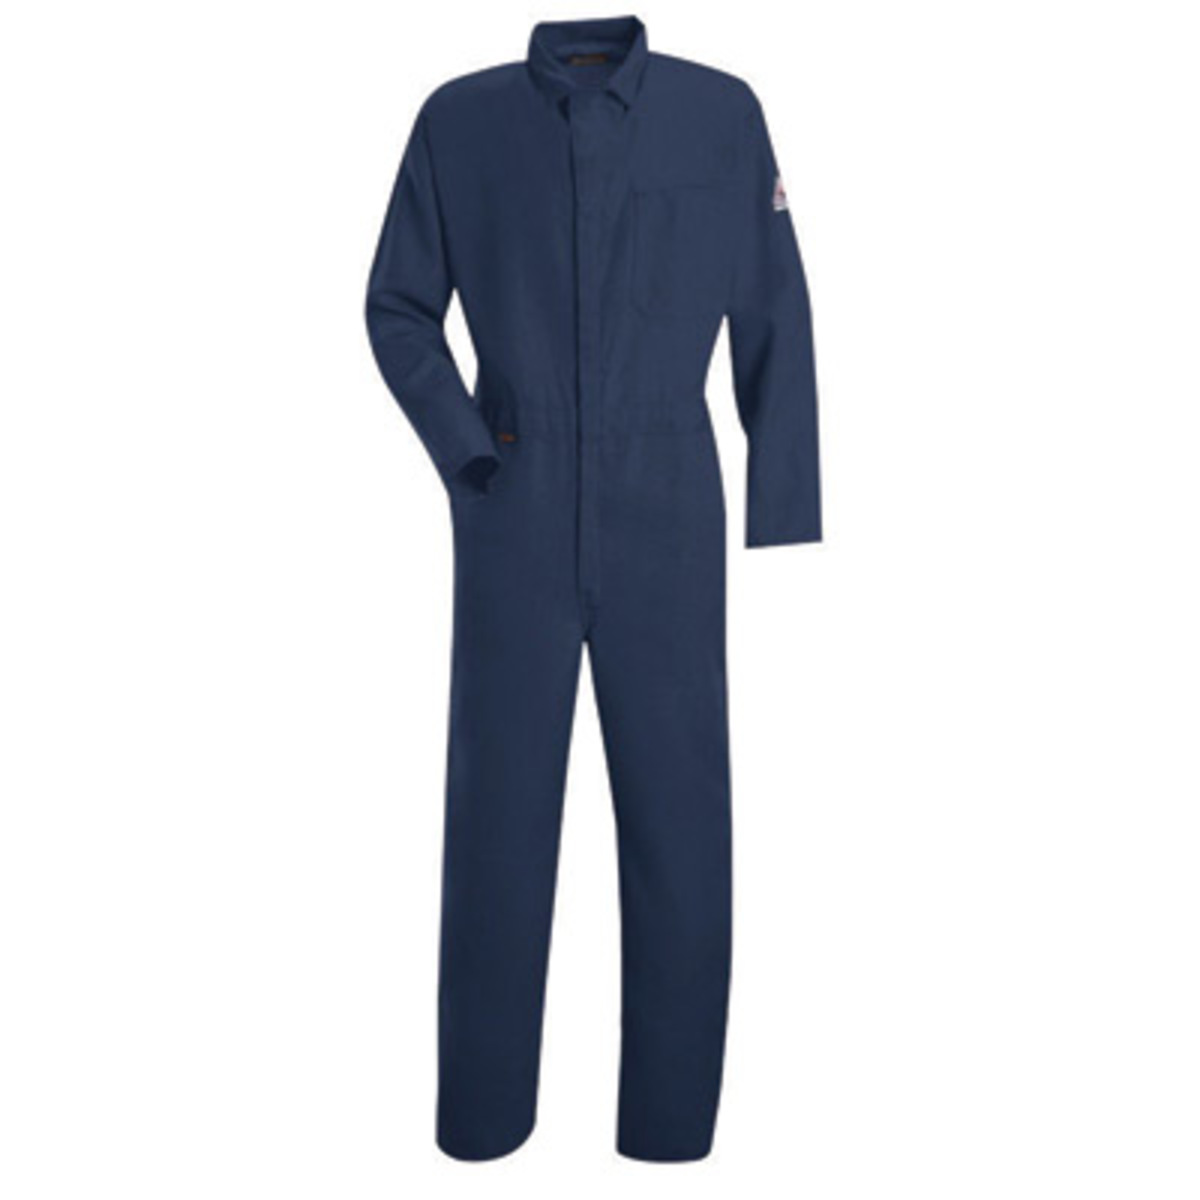 Stanco Safety Products™ 5X Navy Blue Nomex® IIIA Arc Rated Flame Resistant Coveralls With Concealed 2-Way Front Zipper Closure A